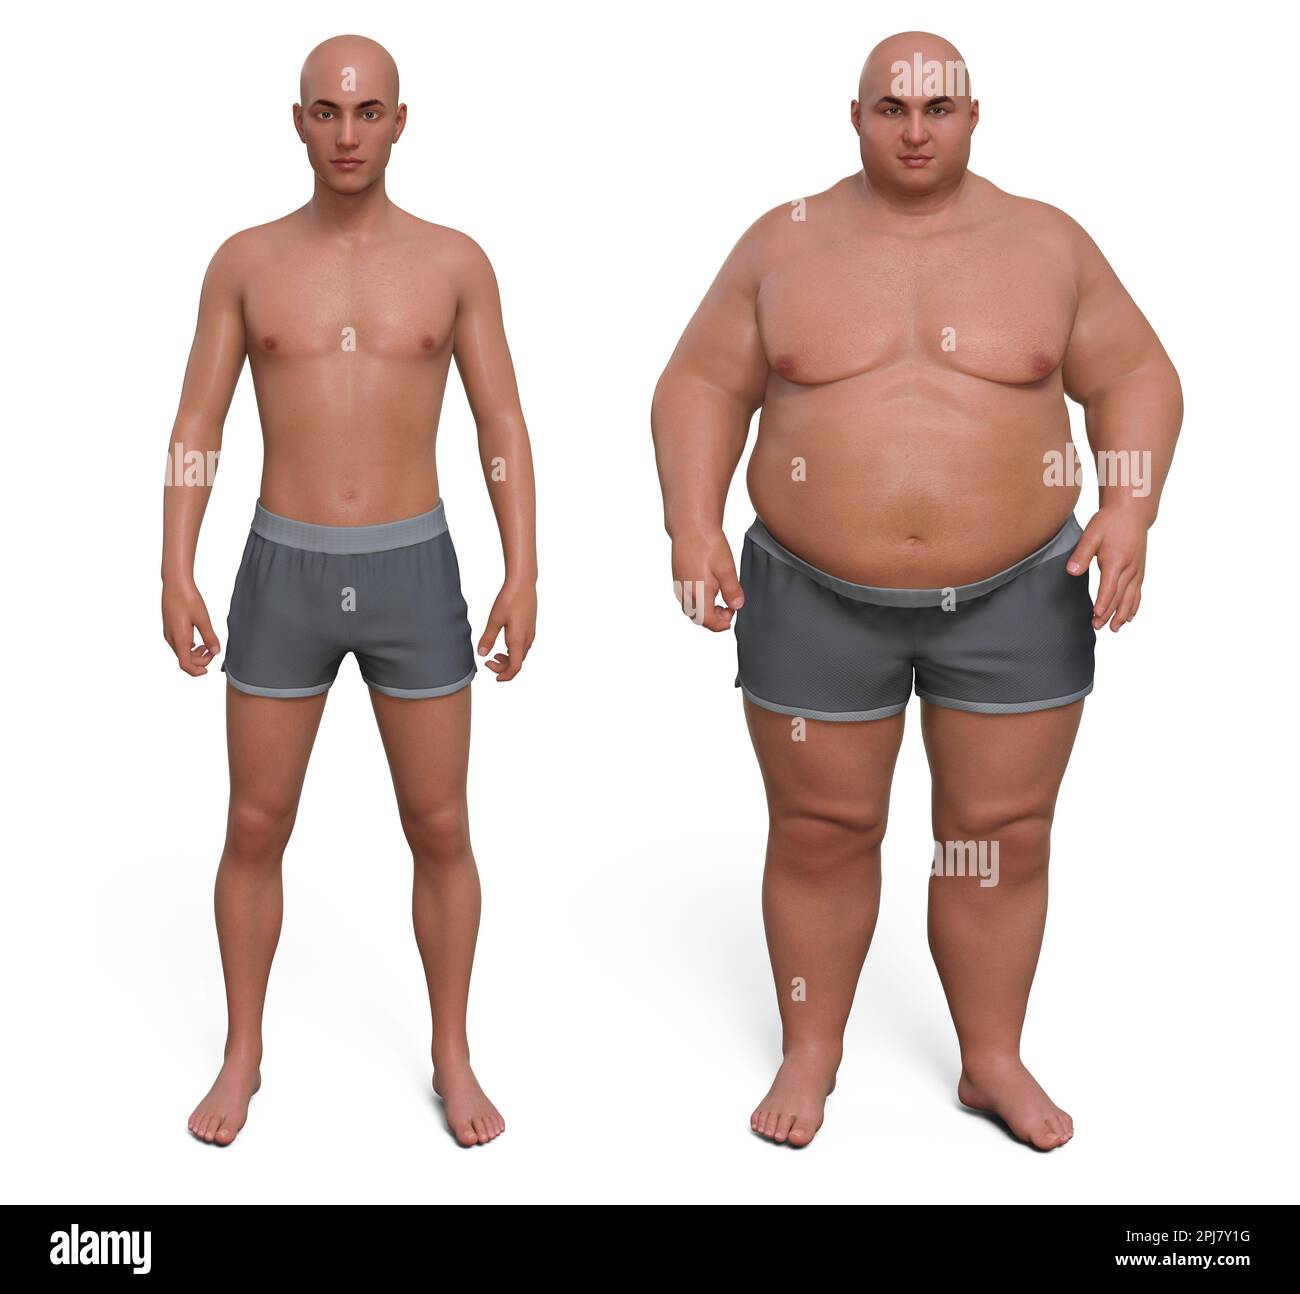 Man before and after gaining weight, illustration Stock Photo